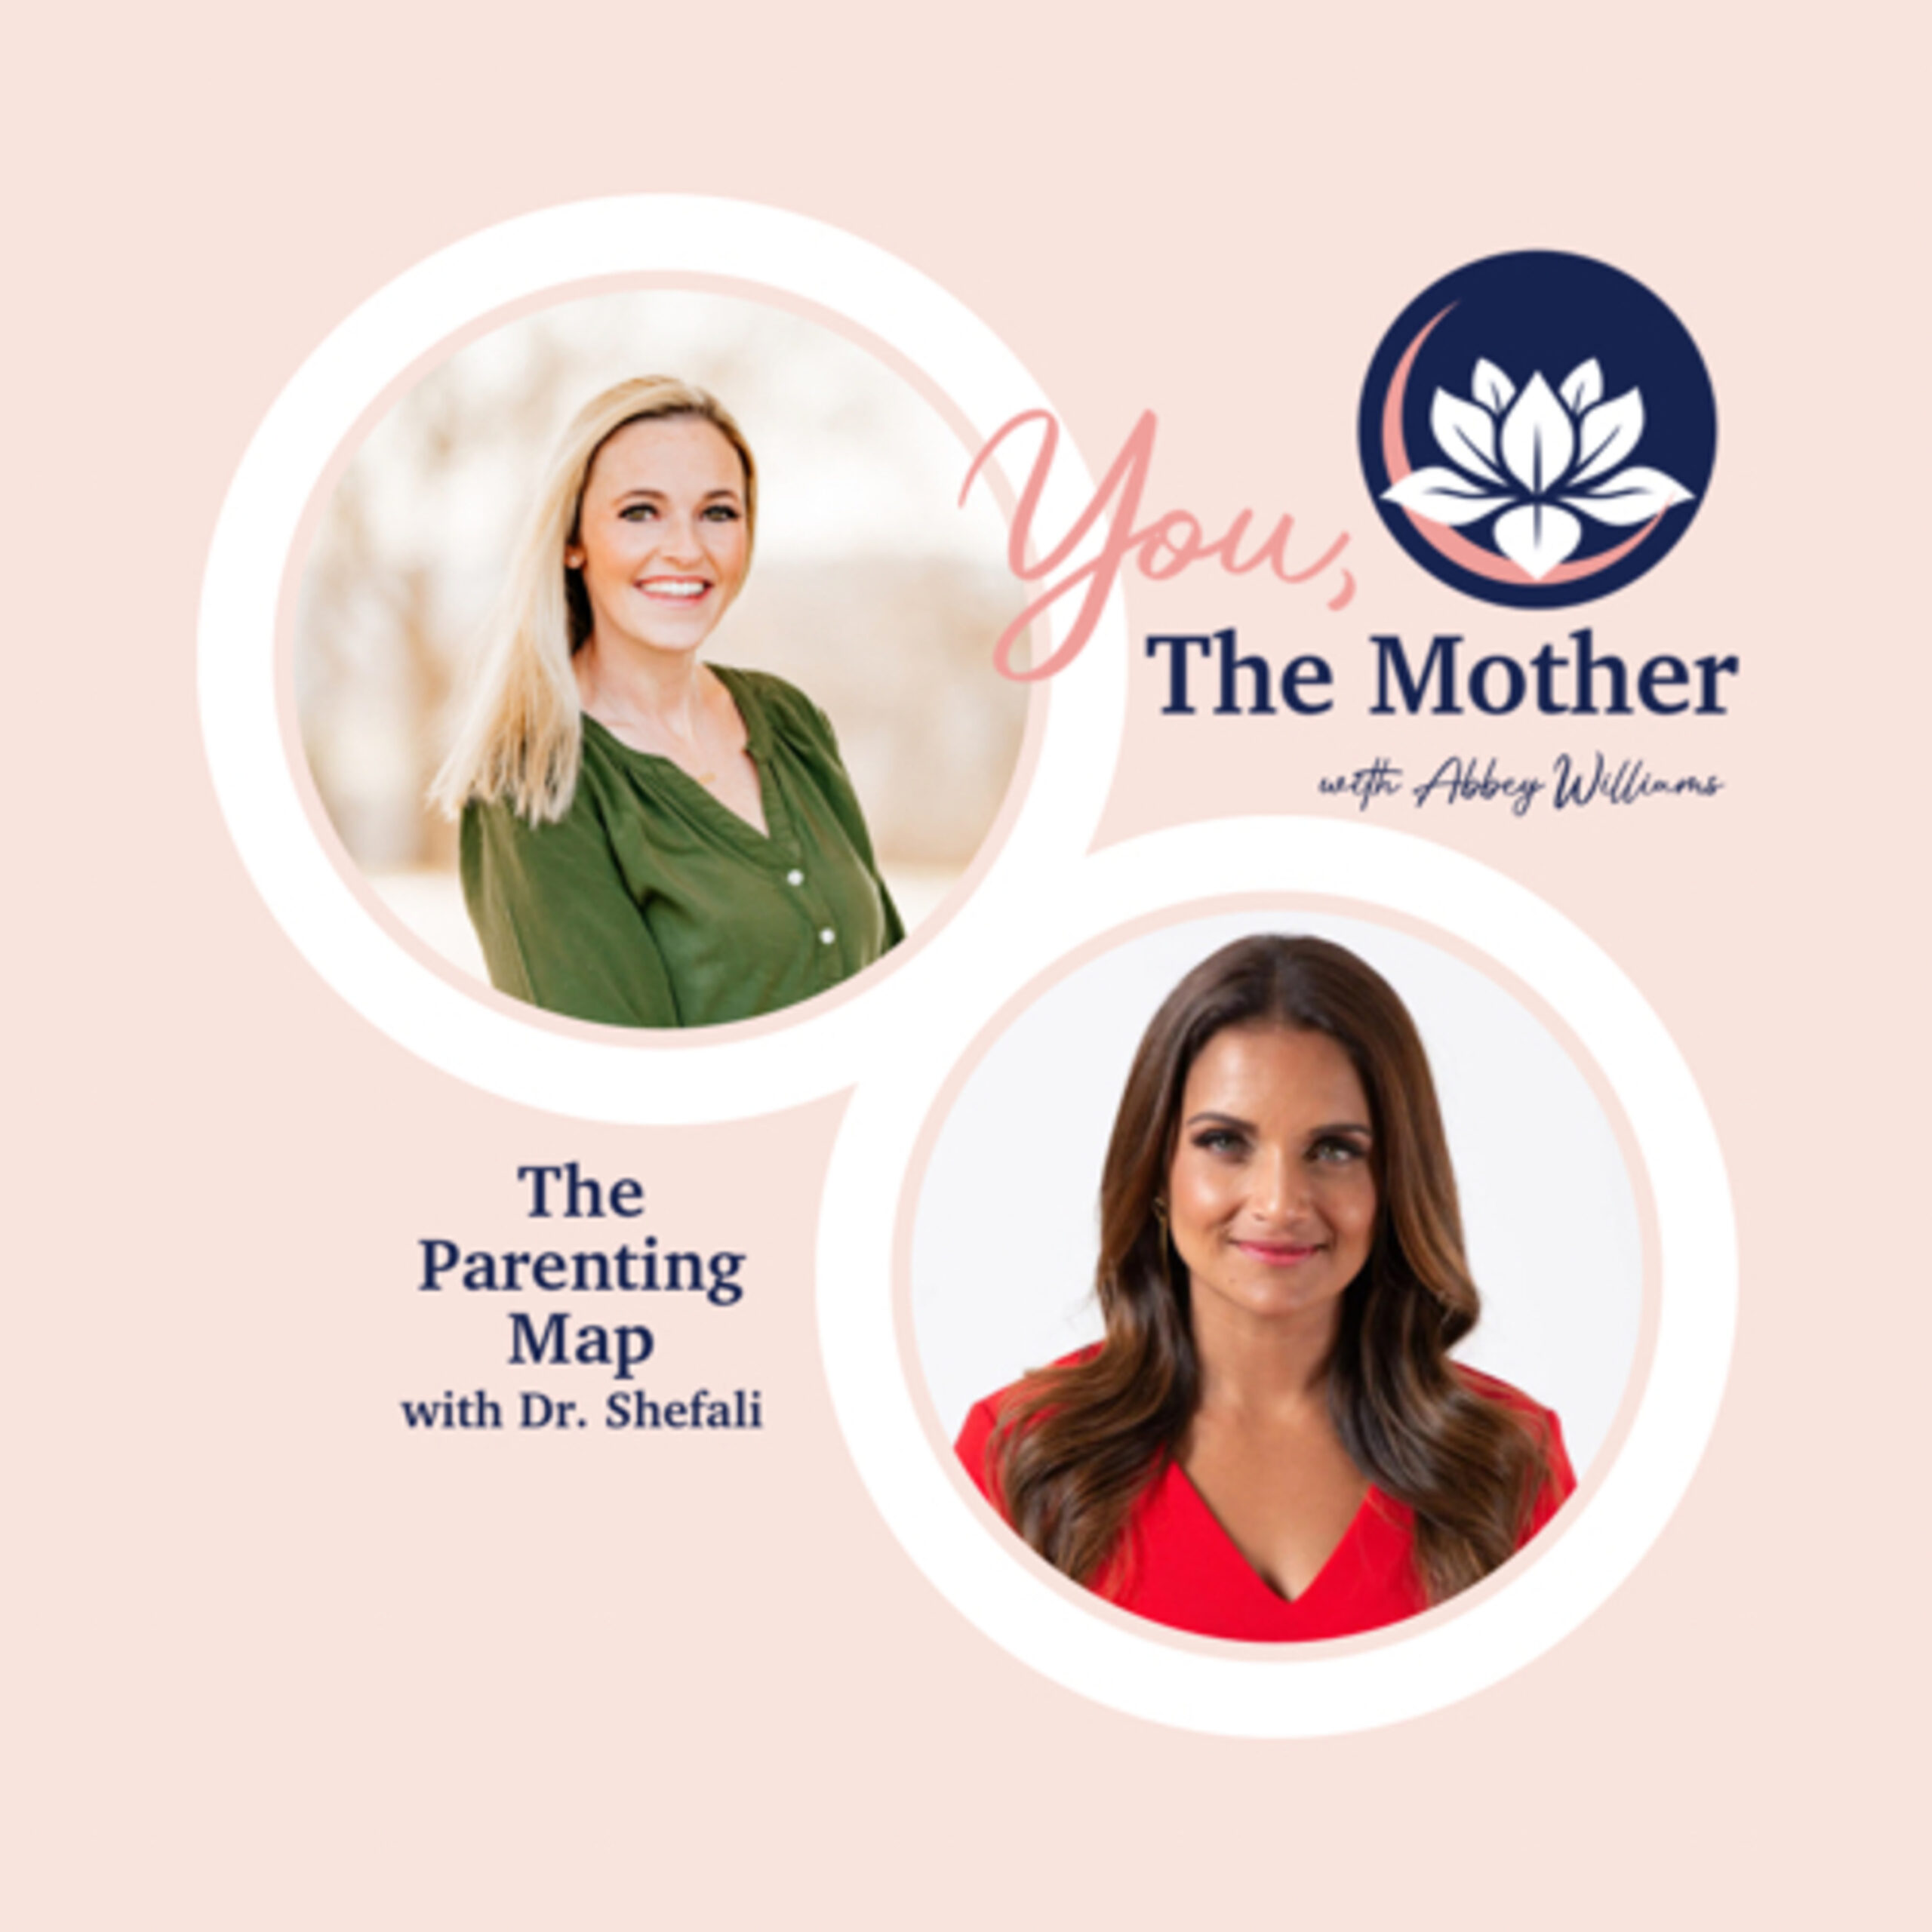 The Parenting Map with Dr. Shefali